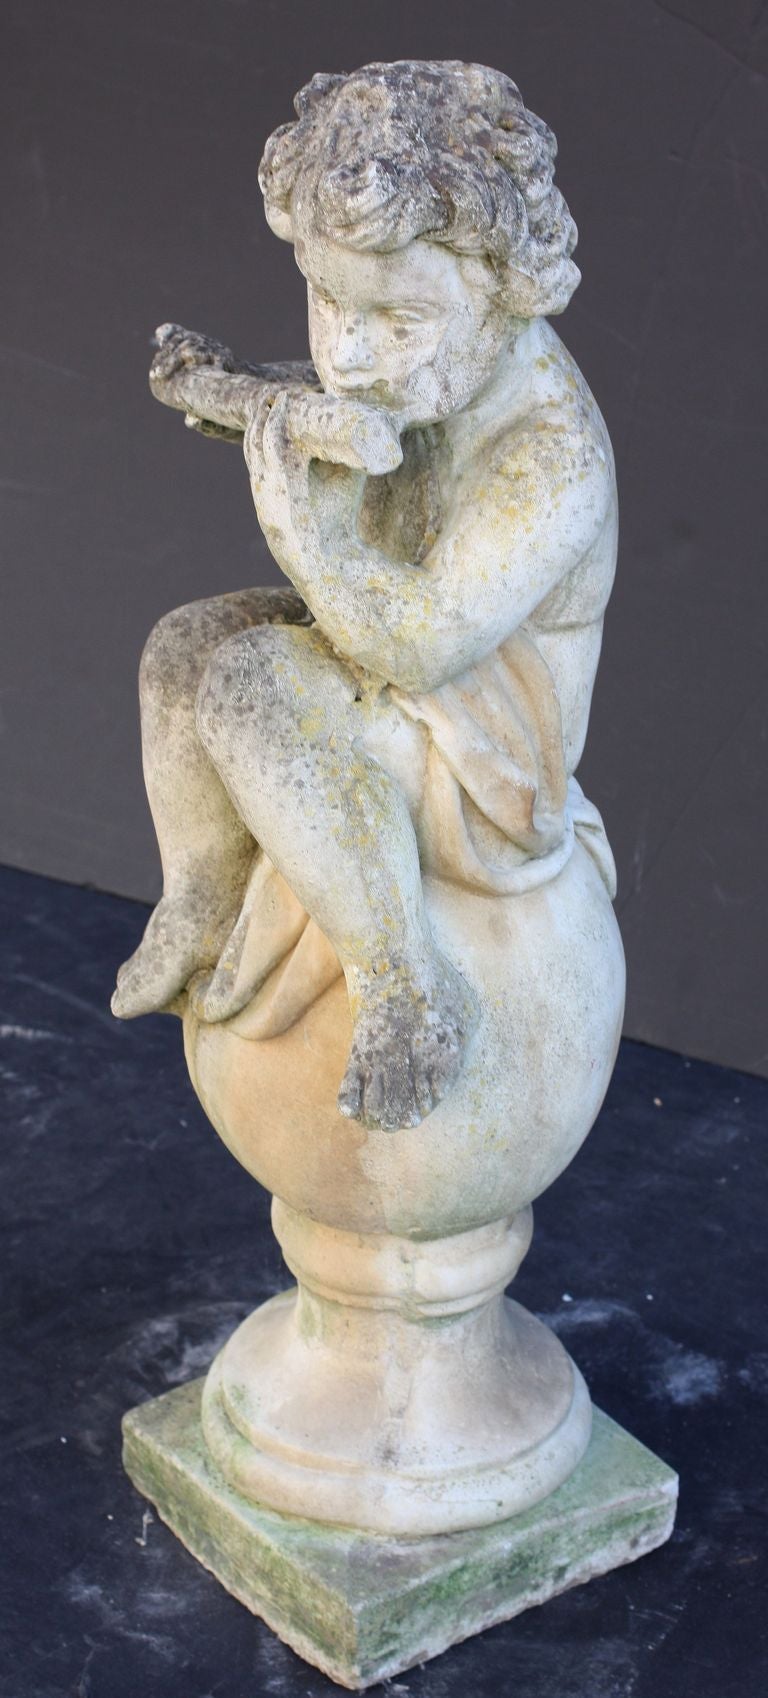 English Garden Stone Figure of a Child Playing Flute 1